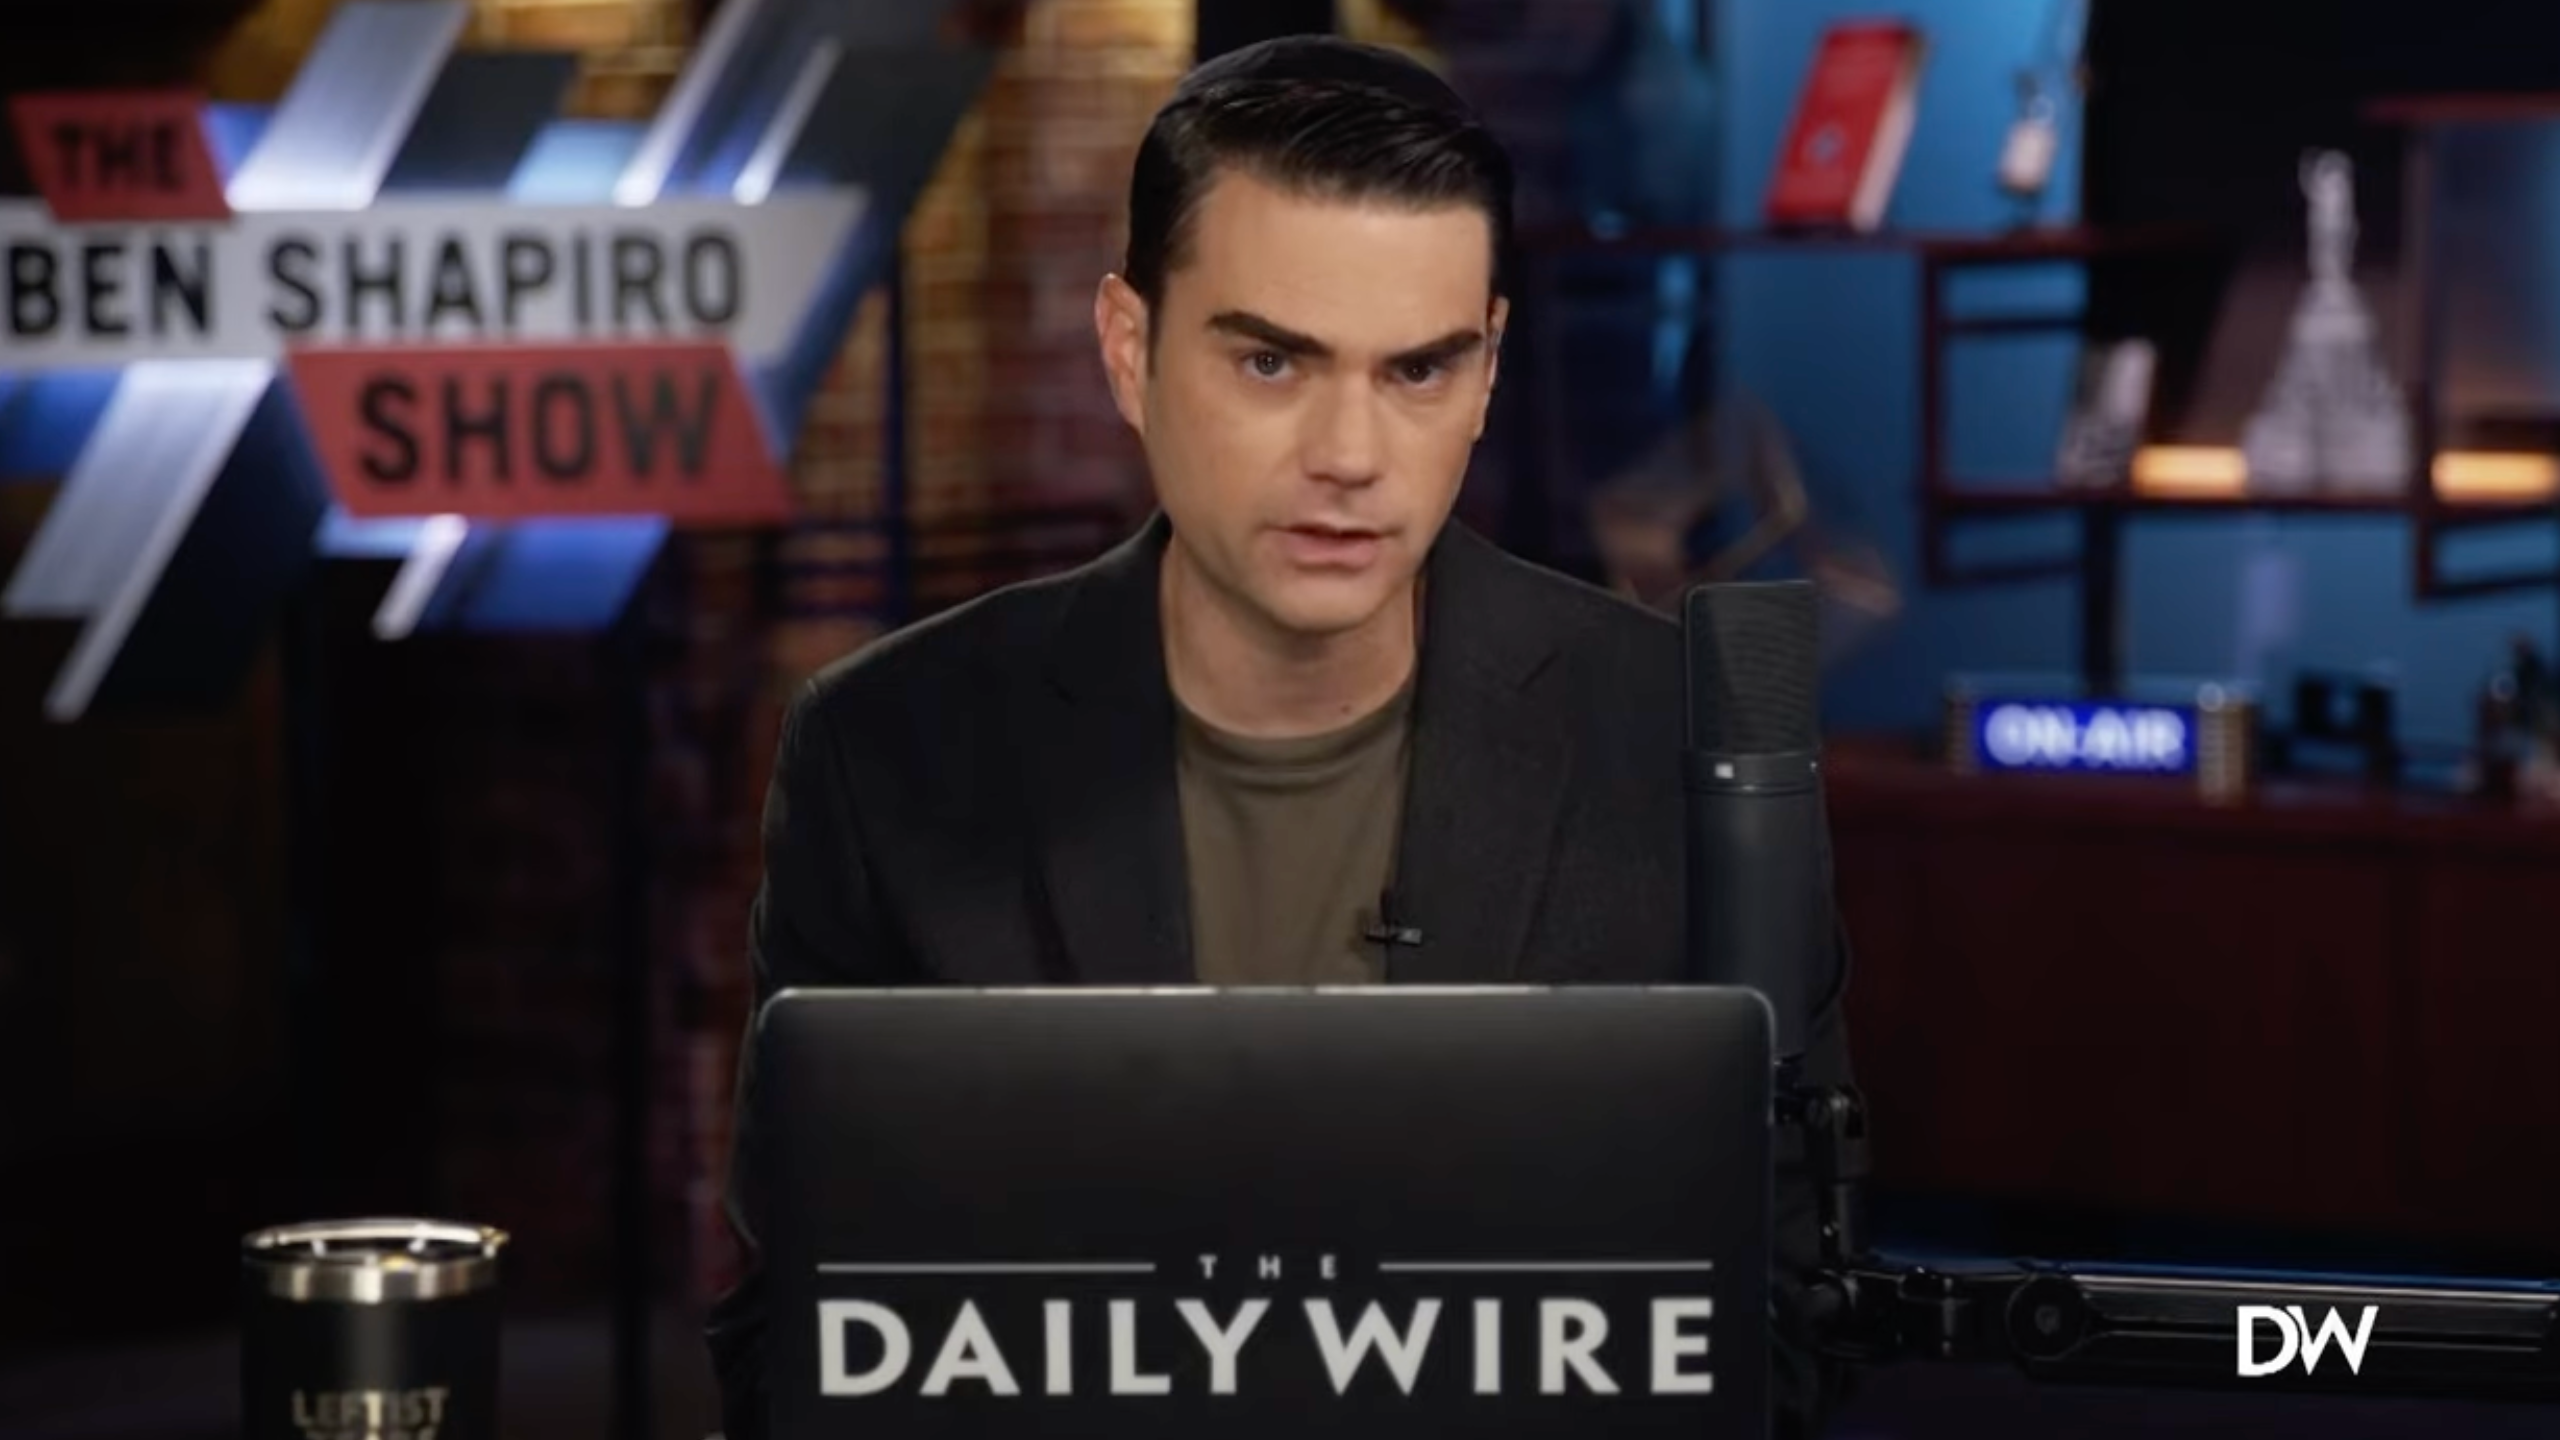 ‘Emotionally Unhinged’: Ben Shapiro and Candace Owens Get In Wild Fight After He Tells Her ‘By All Means’ Quit (mediaite.com)